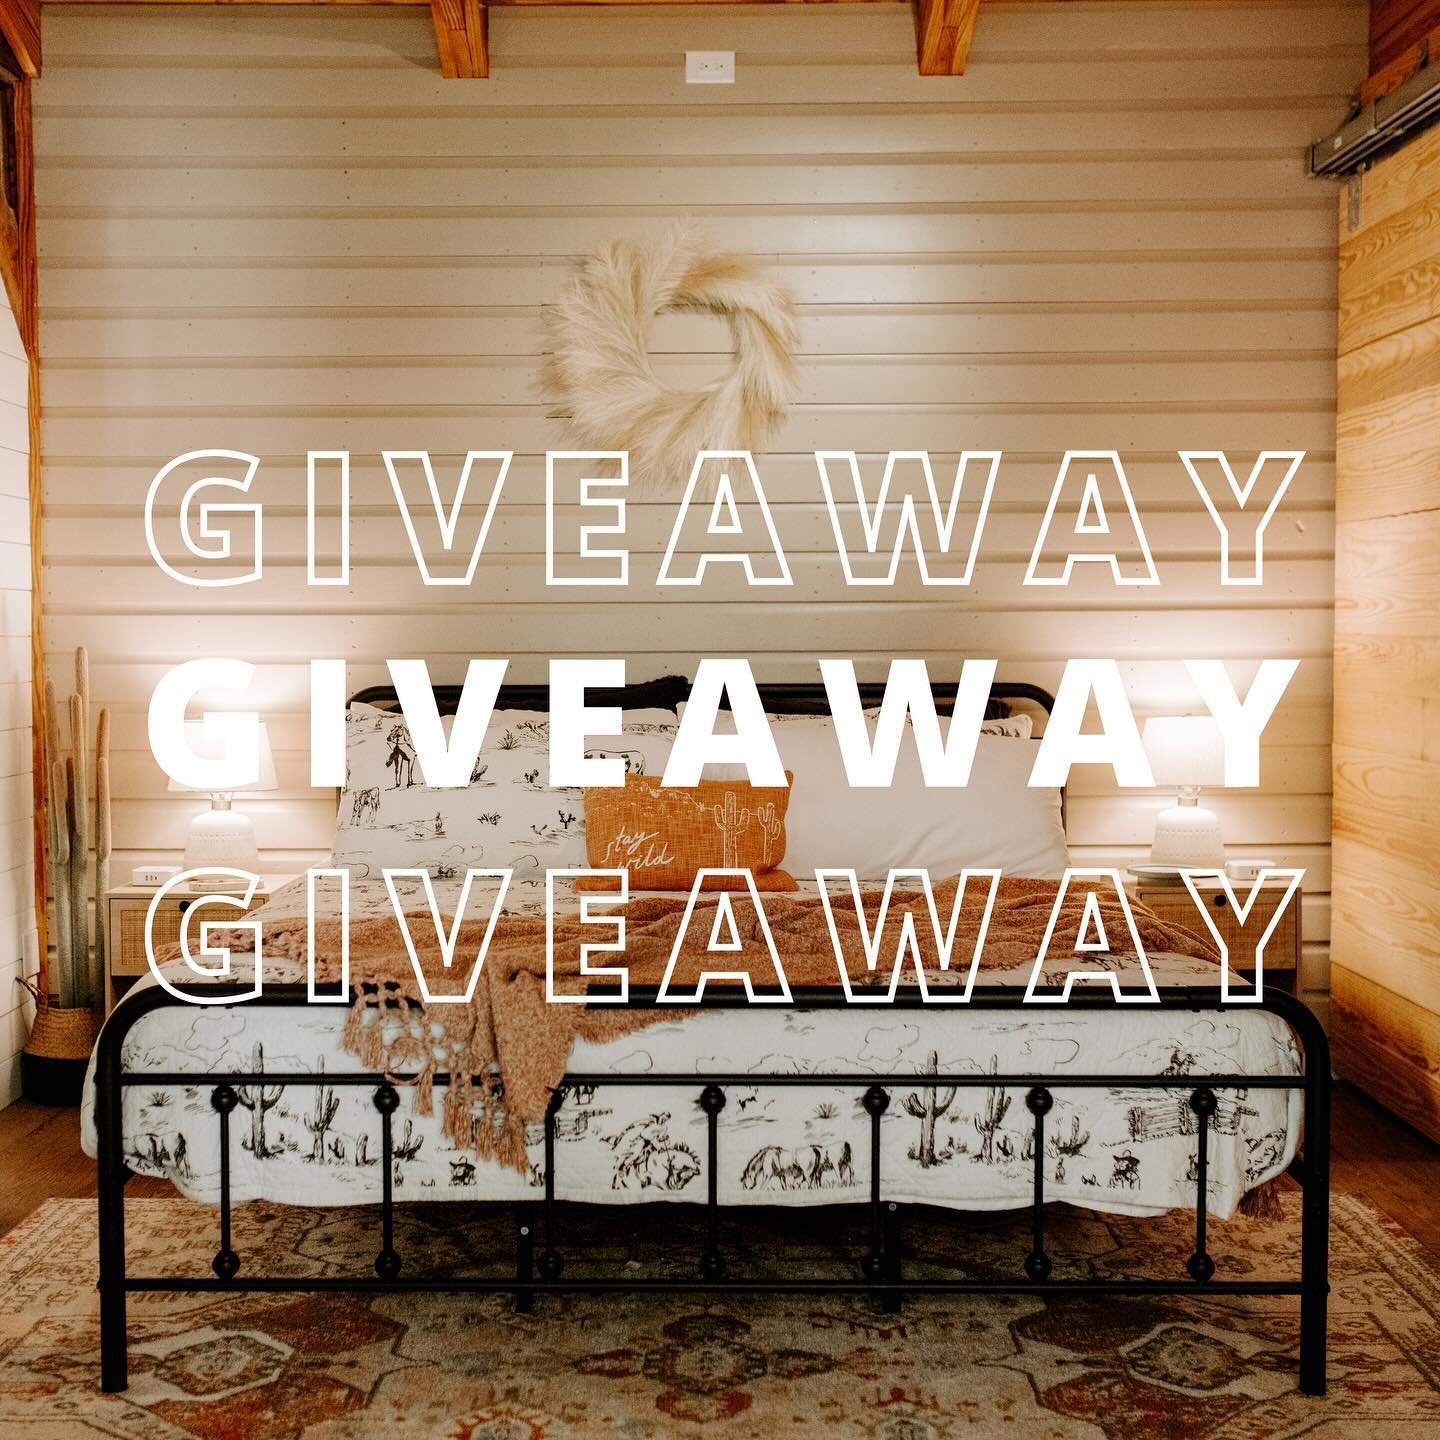 If you didn&rsquo;t know, my husband and I own an airbnb here in my hometown of Salado, TX and we&rsquo;re doing a weekend getaway giveaway at the Howdy House!🤩⁣
⁣
The Howdy House is located right off Main Street within walking distance to all the f